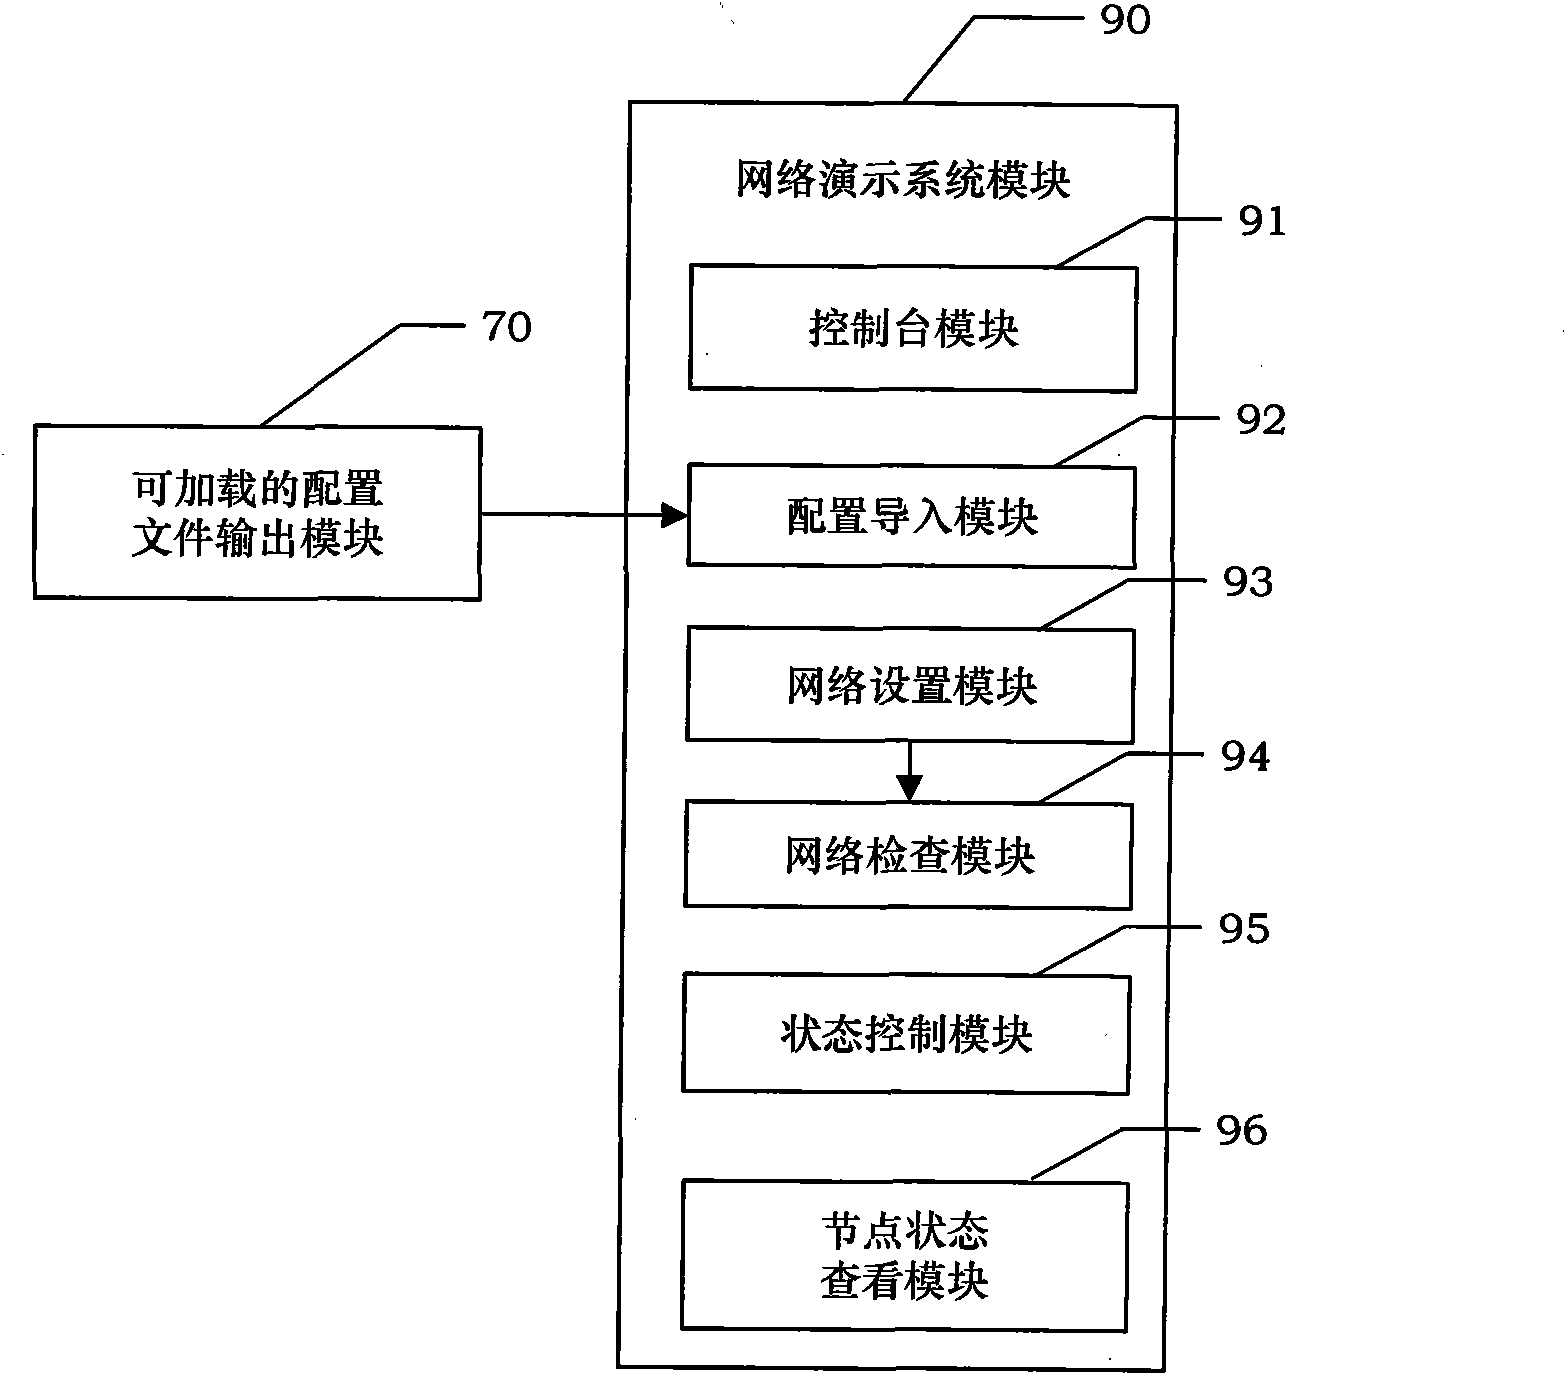 Simulation and demonstration system for design and validation of AFDX (Avionics Full Duplex Switched Ethernet) network and simulation and demonstration method thereof